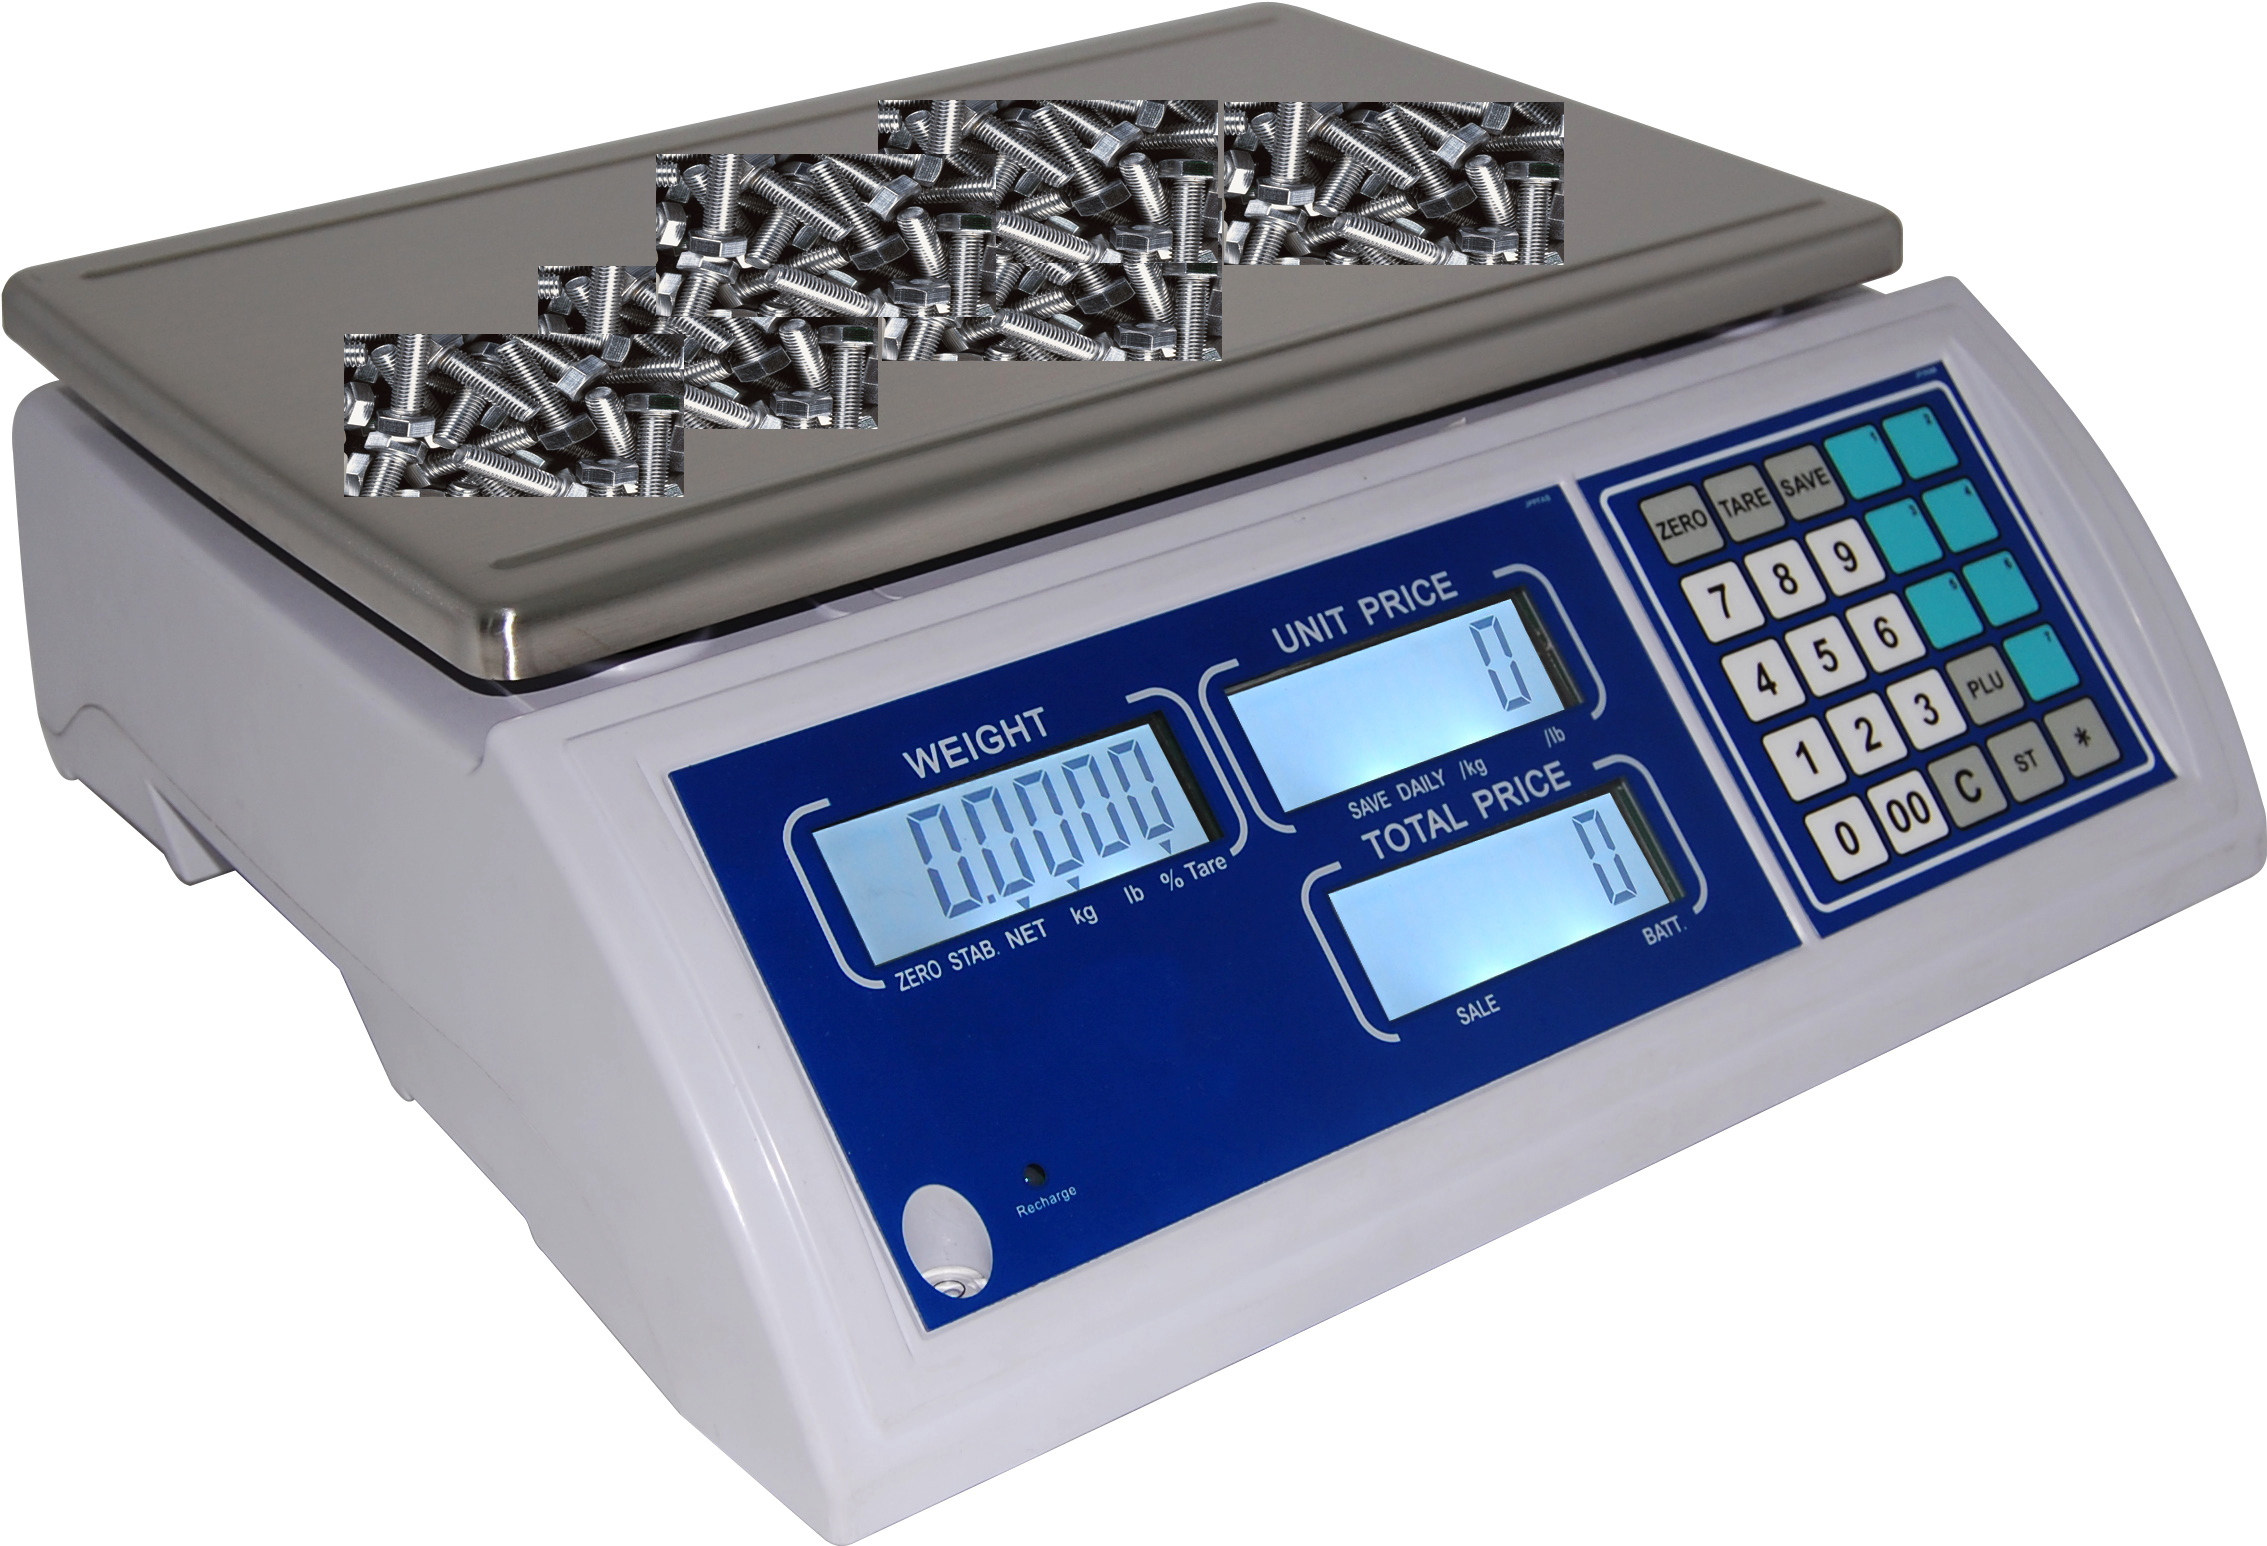 JC SERIES COUNTING SCALES